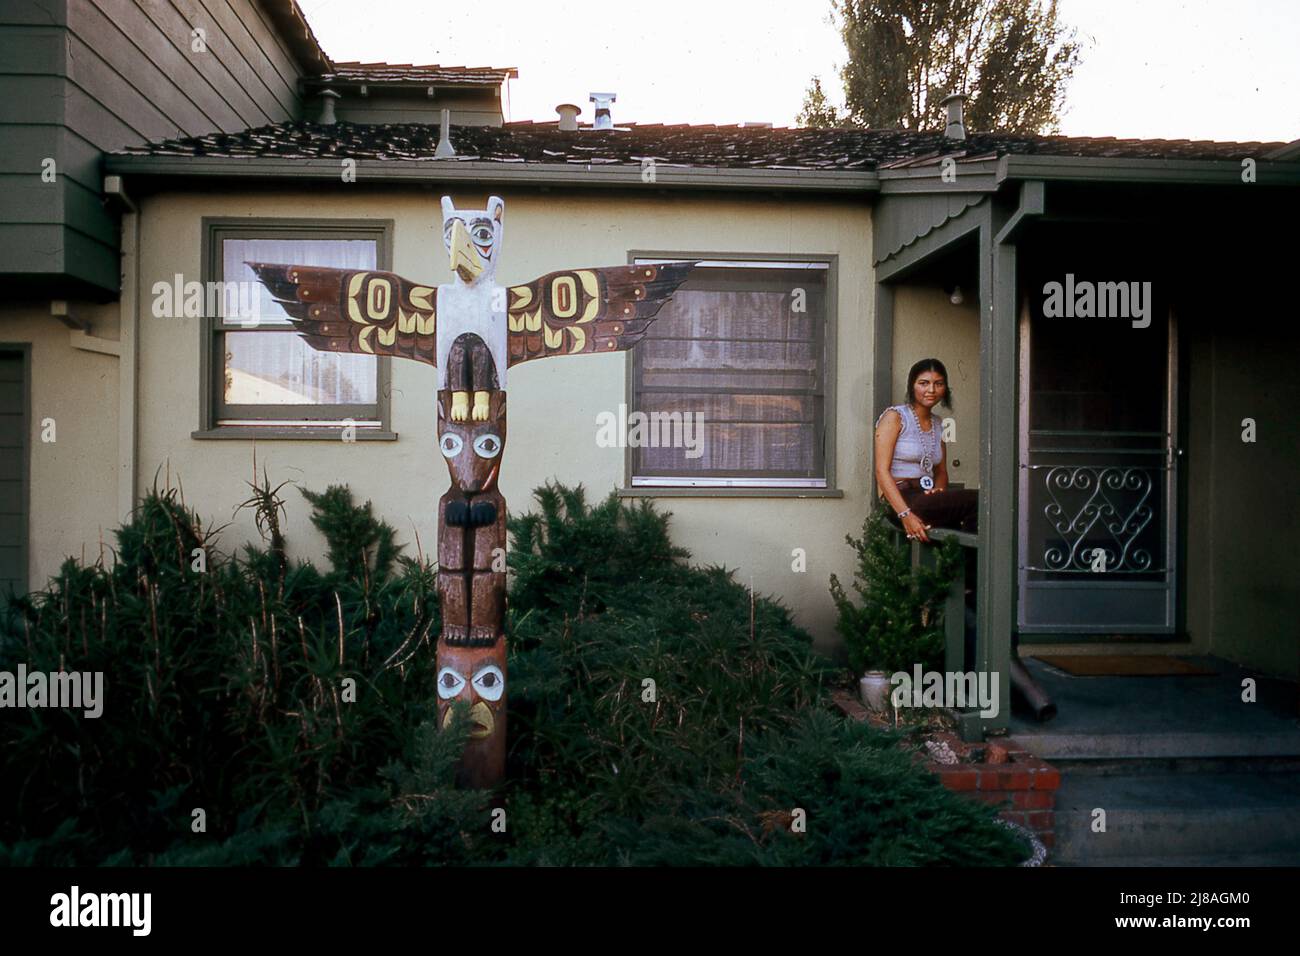 Oakland, Calif. - Urban Indian at home in 1972. Family put a totum pole in front of their home. Totum pole from tribes in northwest United States. Government promoted Native Americans to leave the reservation and move to the cities in the late 1950's and led to occupatin of Alcatraz Island in 1968-1970. Made the Bay Area Native Americans unit and committed to preserving heritage. Stock Photo